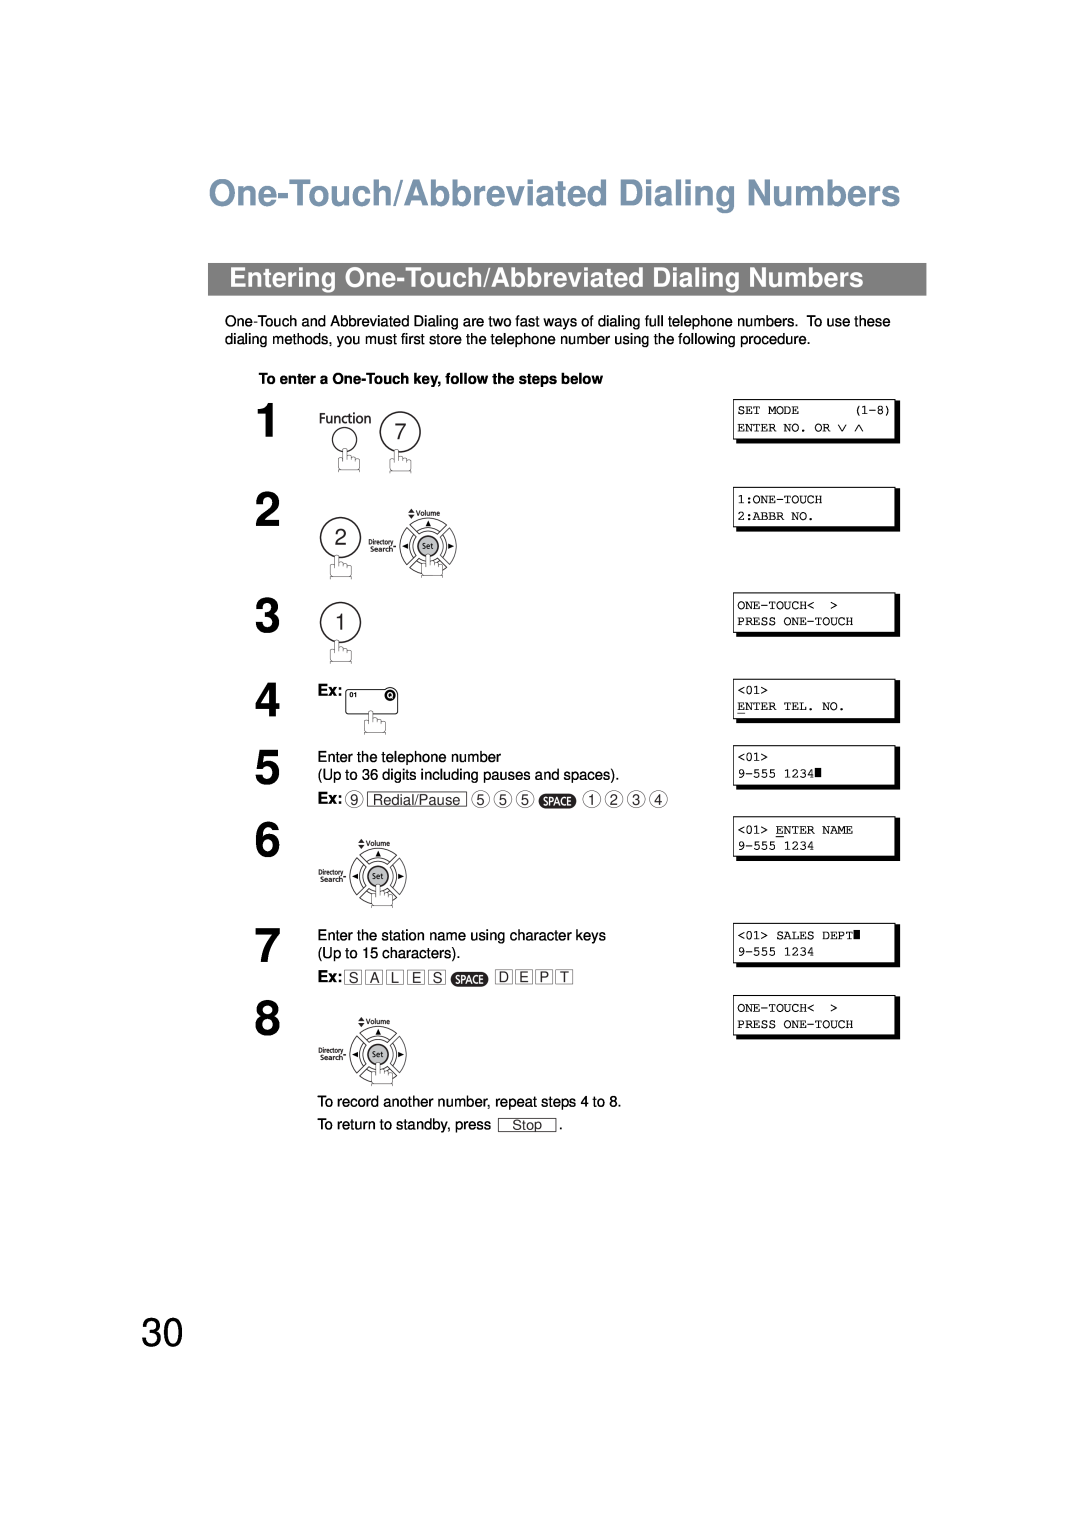 Panasonic UF-6200 Entering One-Touch/Abbreviated Dialing Numbers, To enter a One-Touch key, follow the steps below 